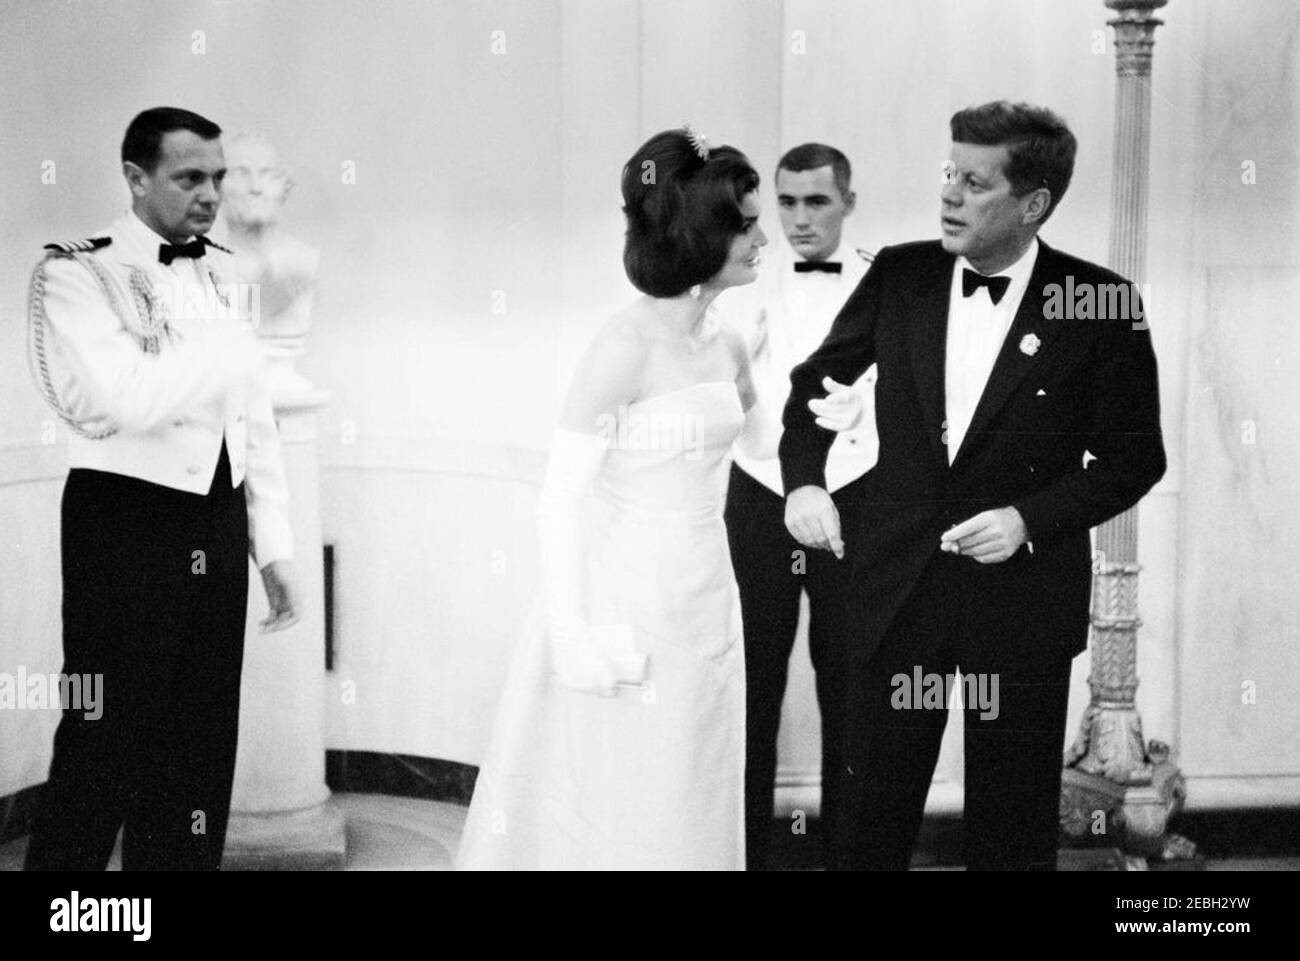 First Lady Jacqueline Kennedy attends dinner in Houston Texas New 8x10 Photo 